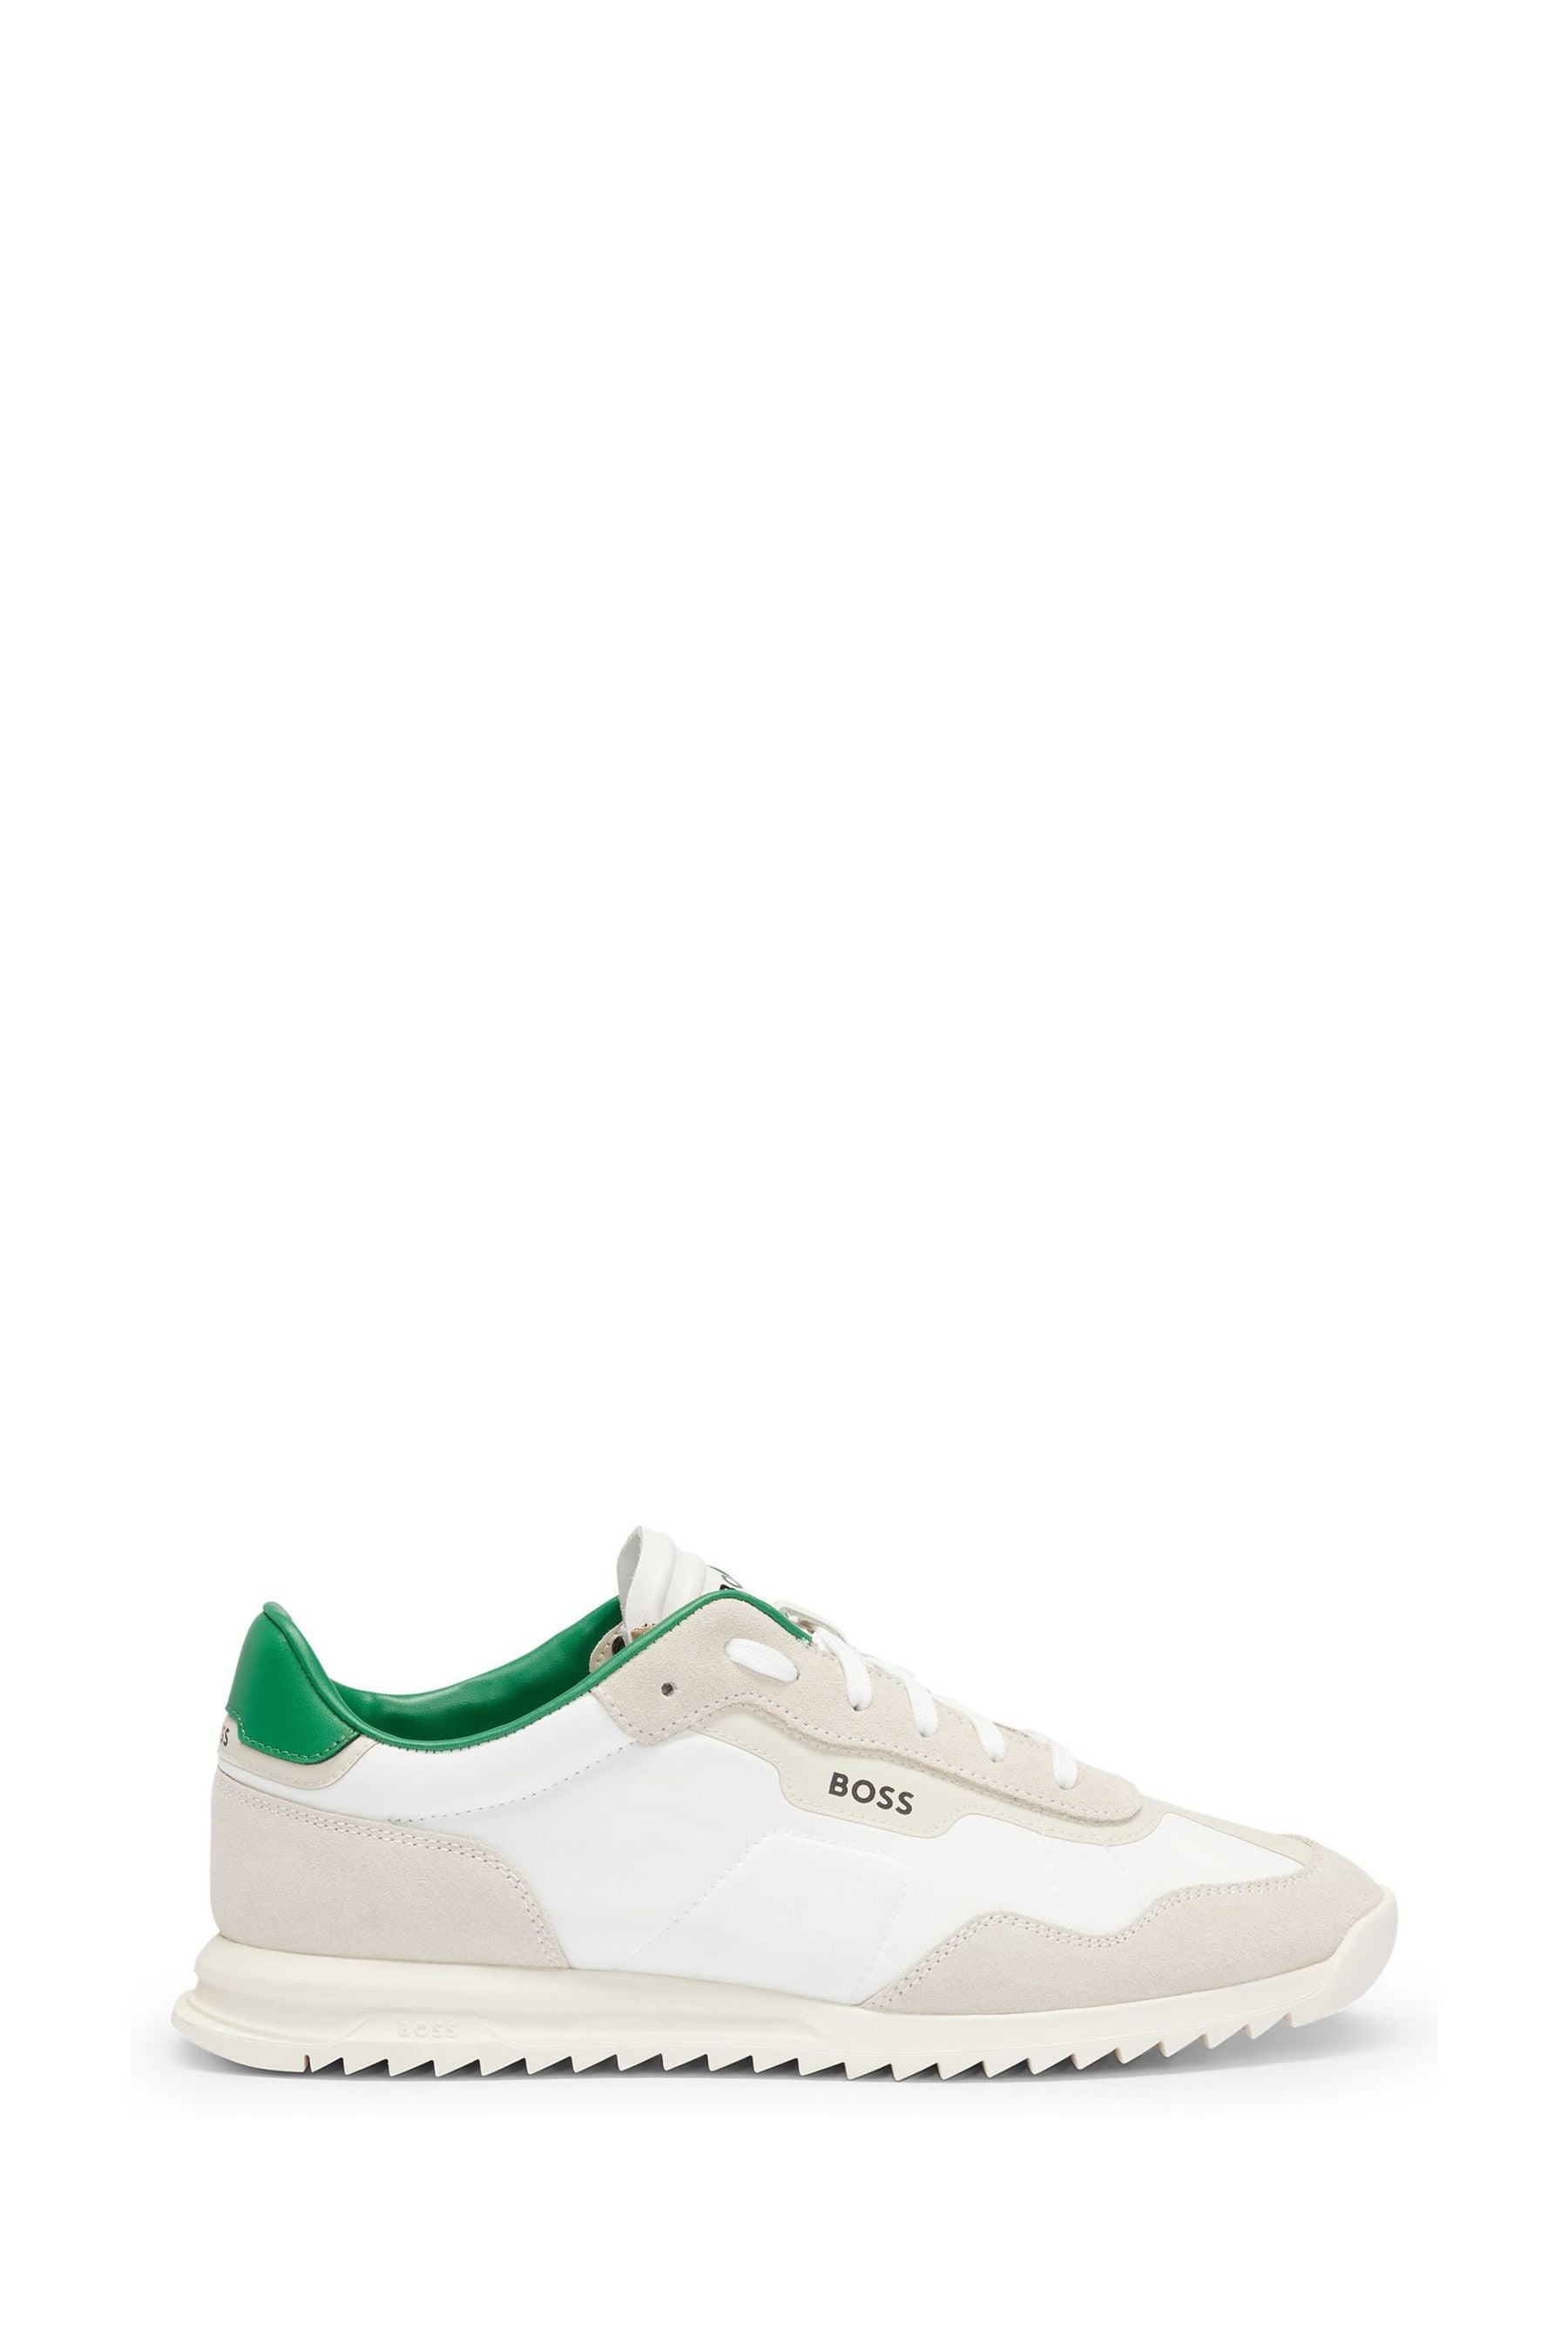 Buy BOSS White Neutral Zayn Trainers from the Next UK online shop